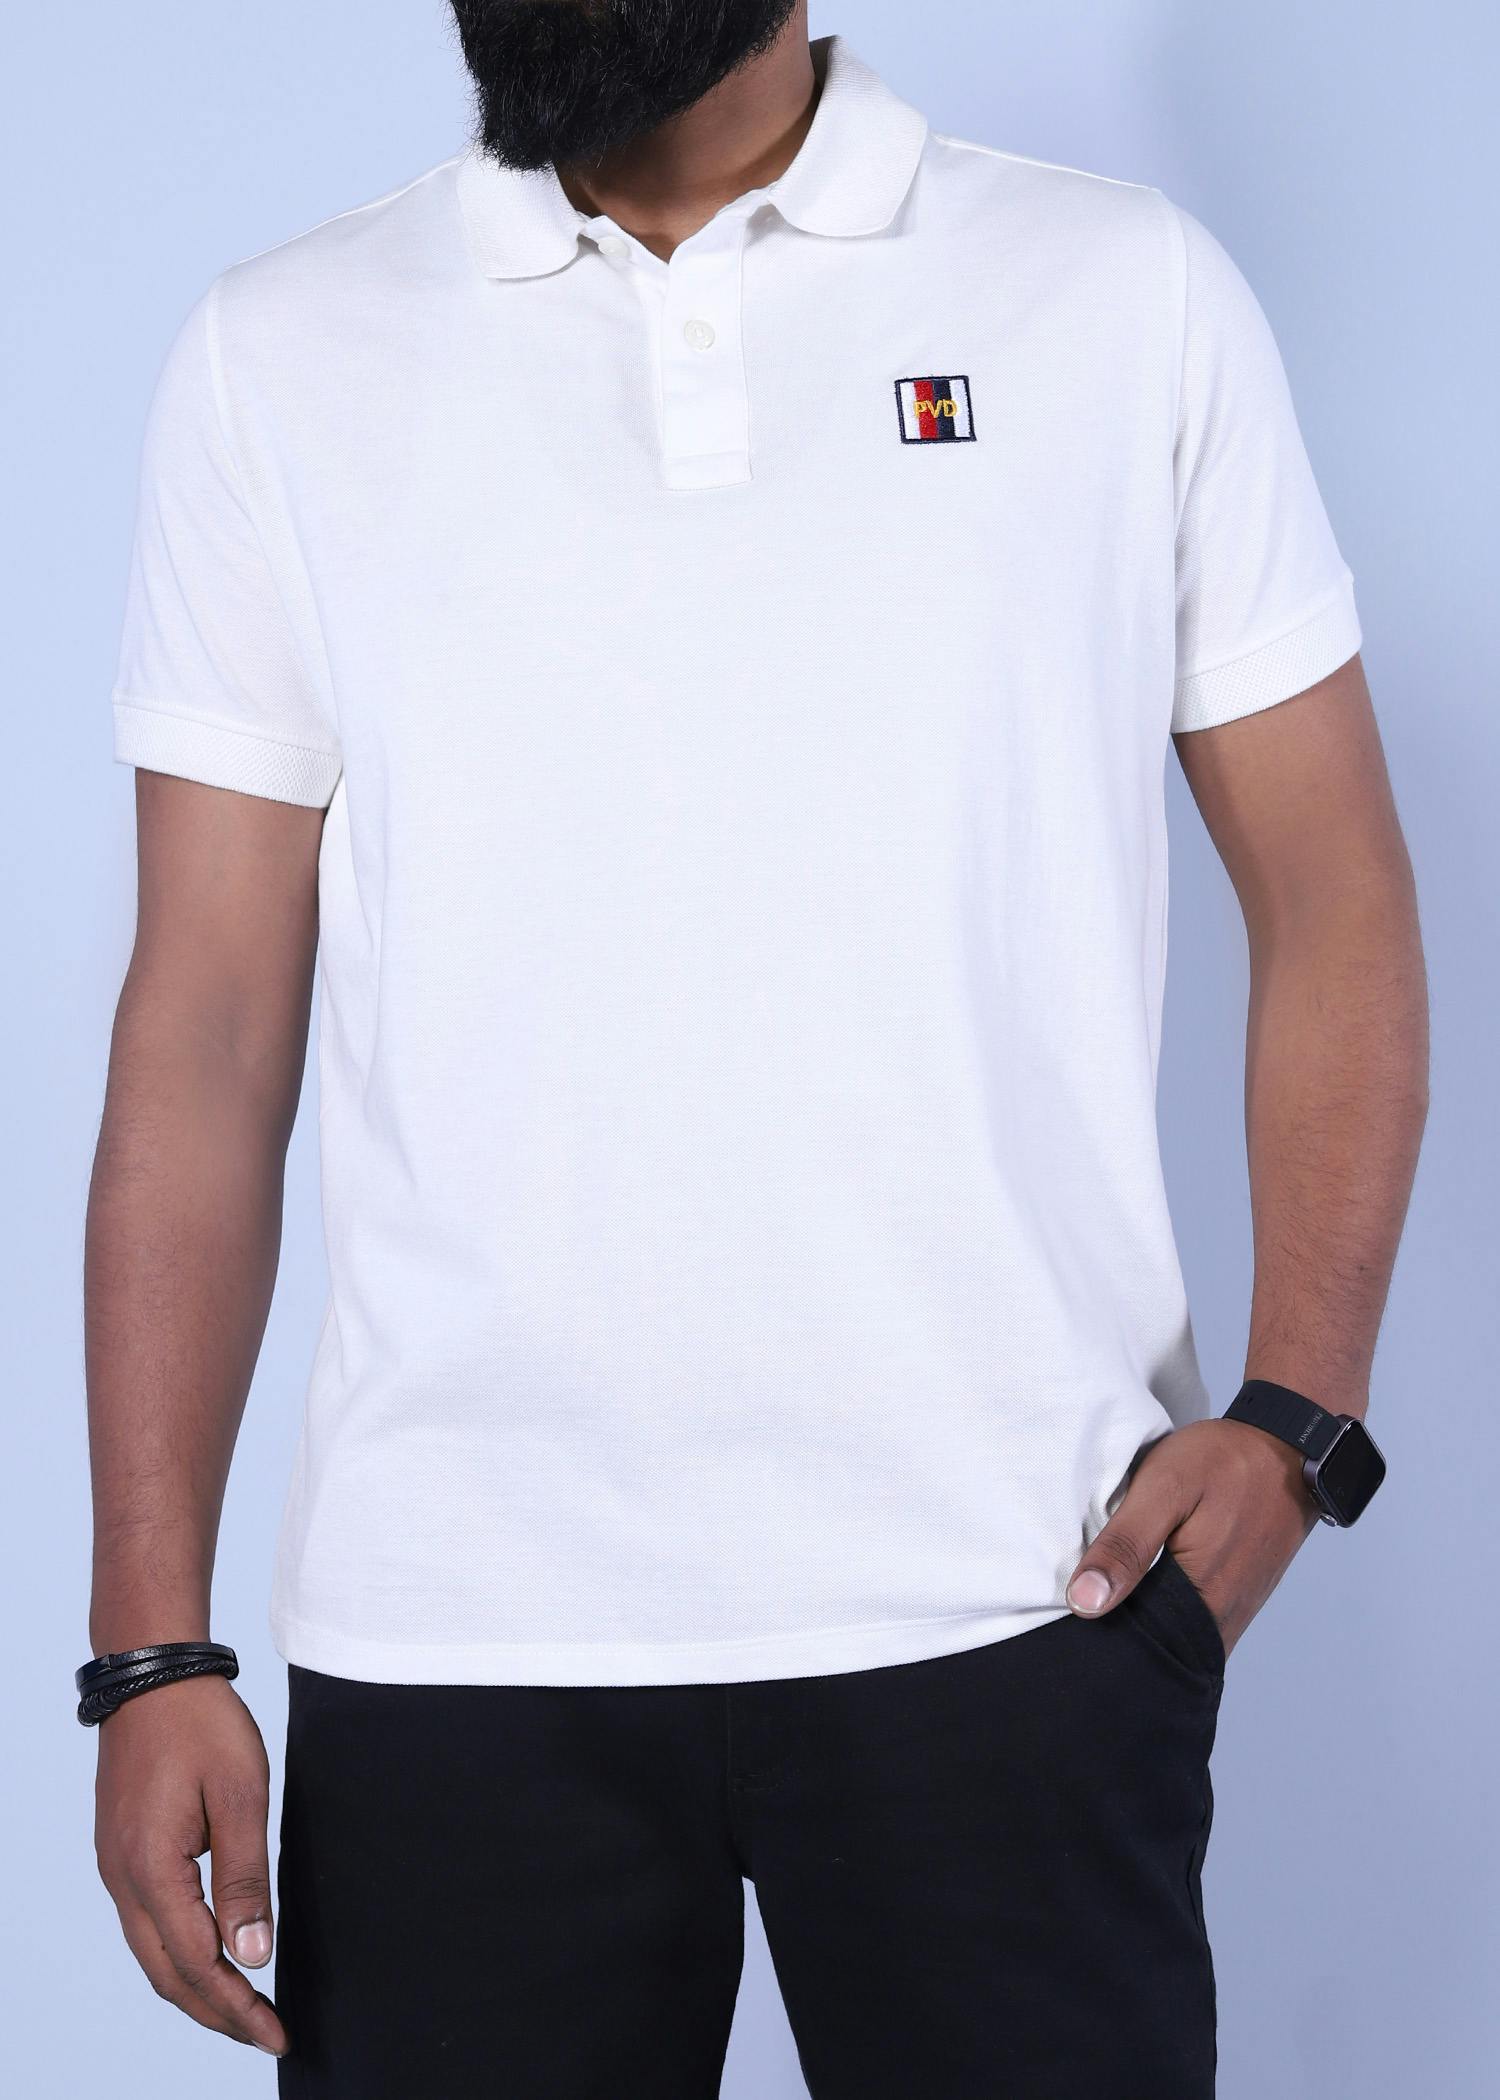 nightingale iii polo white color half front view